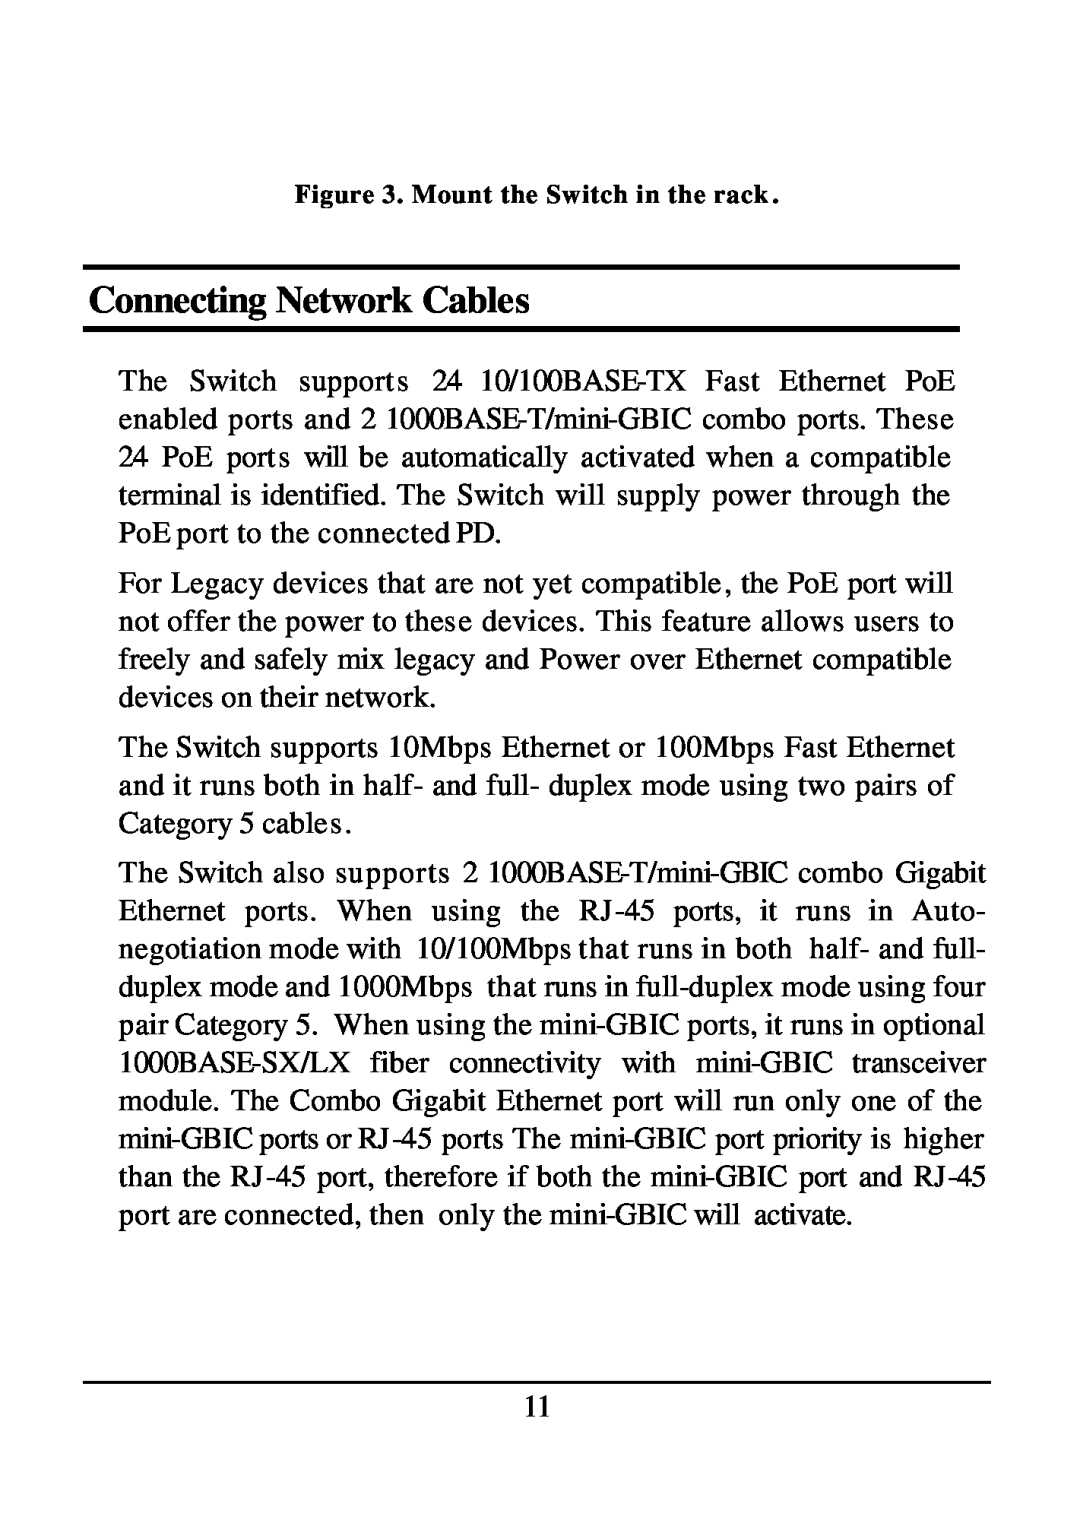 D-Link DES-1526 manual Connecting Network Cables 